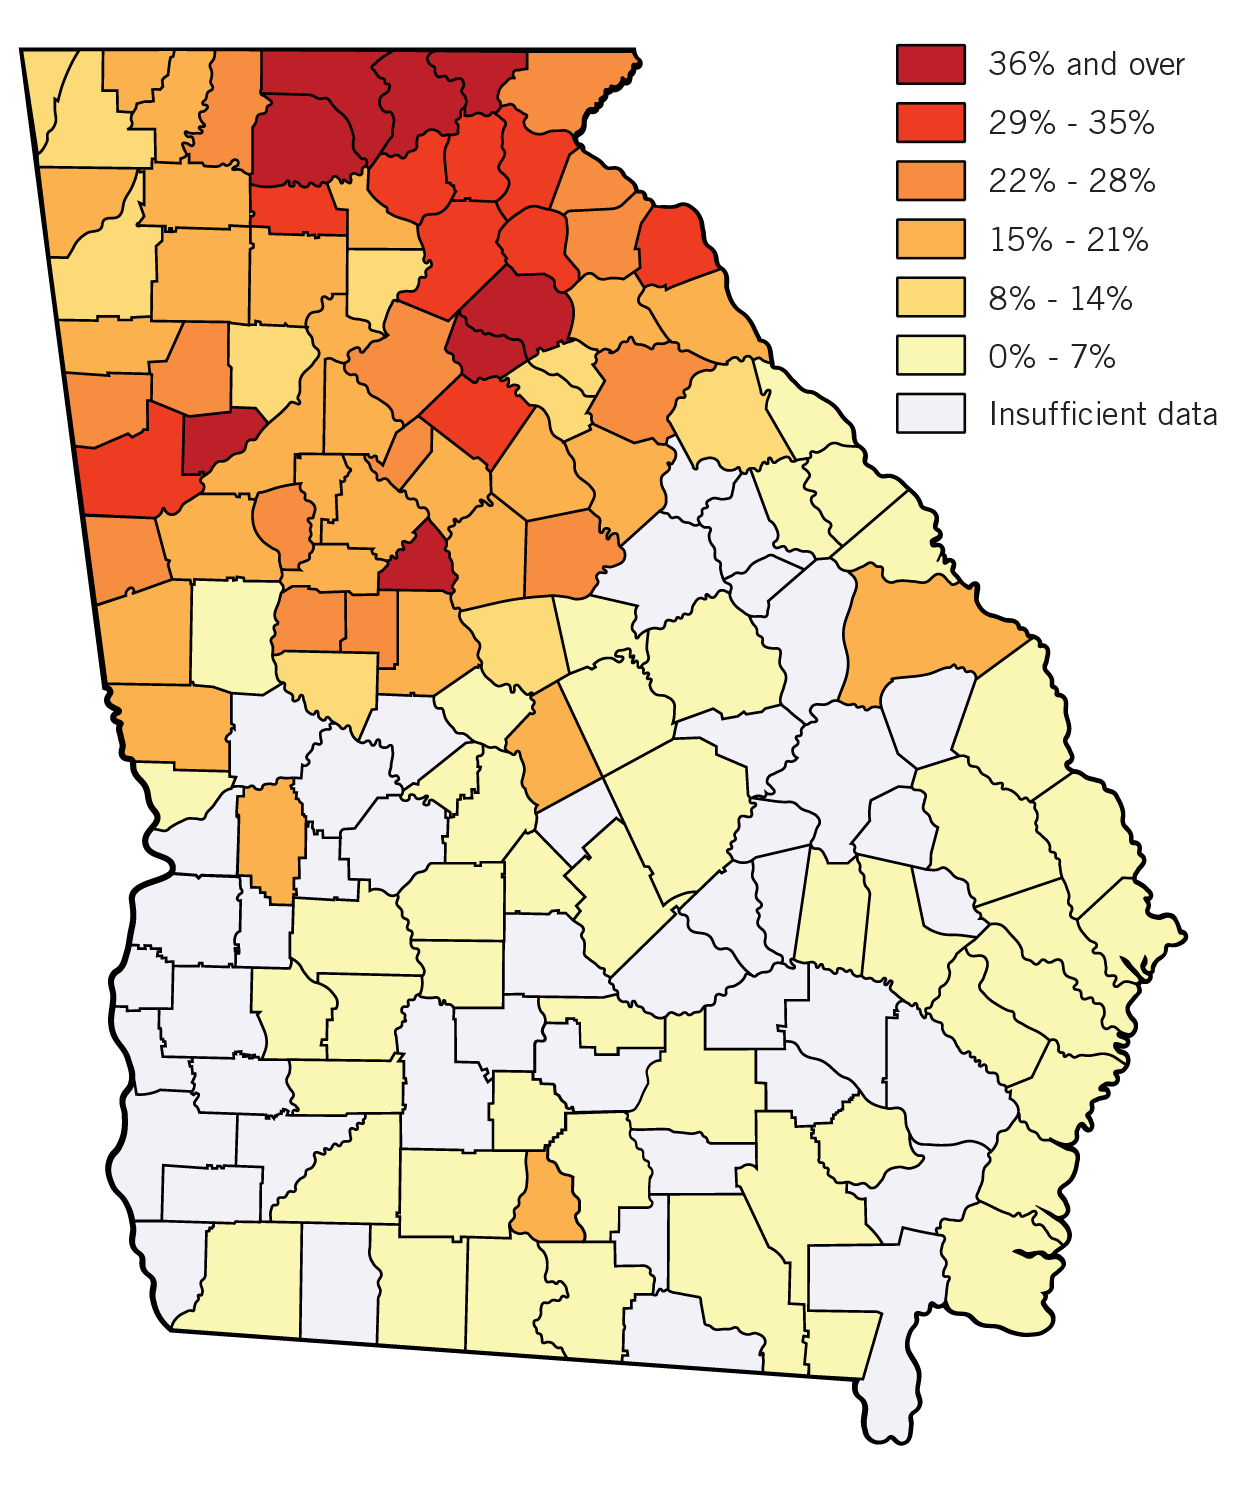 A color-coded map of Georgia counties shows the percentage of homes tested with radon levels at or above 4.0 pCI/L.